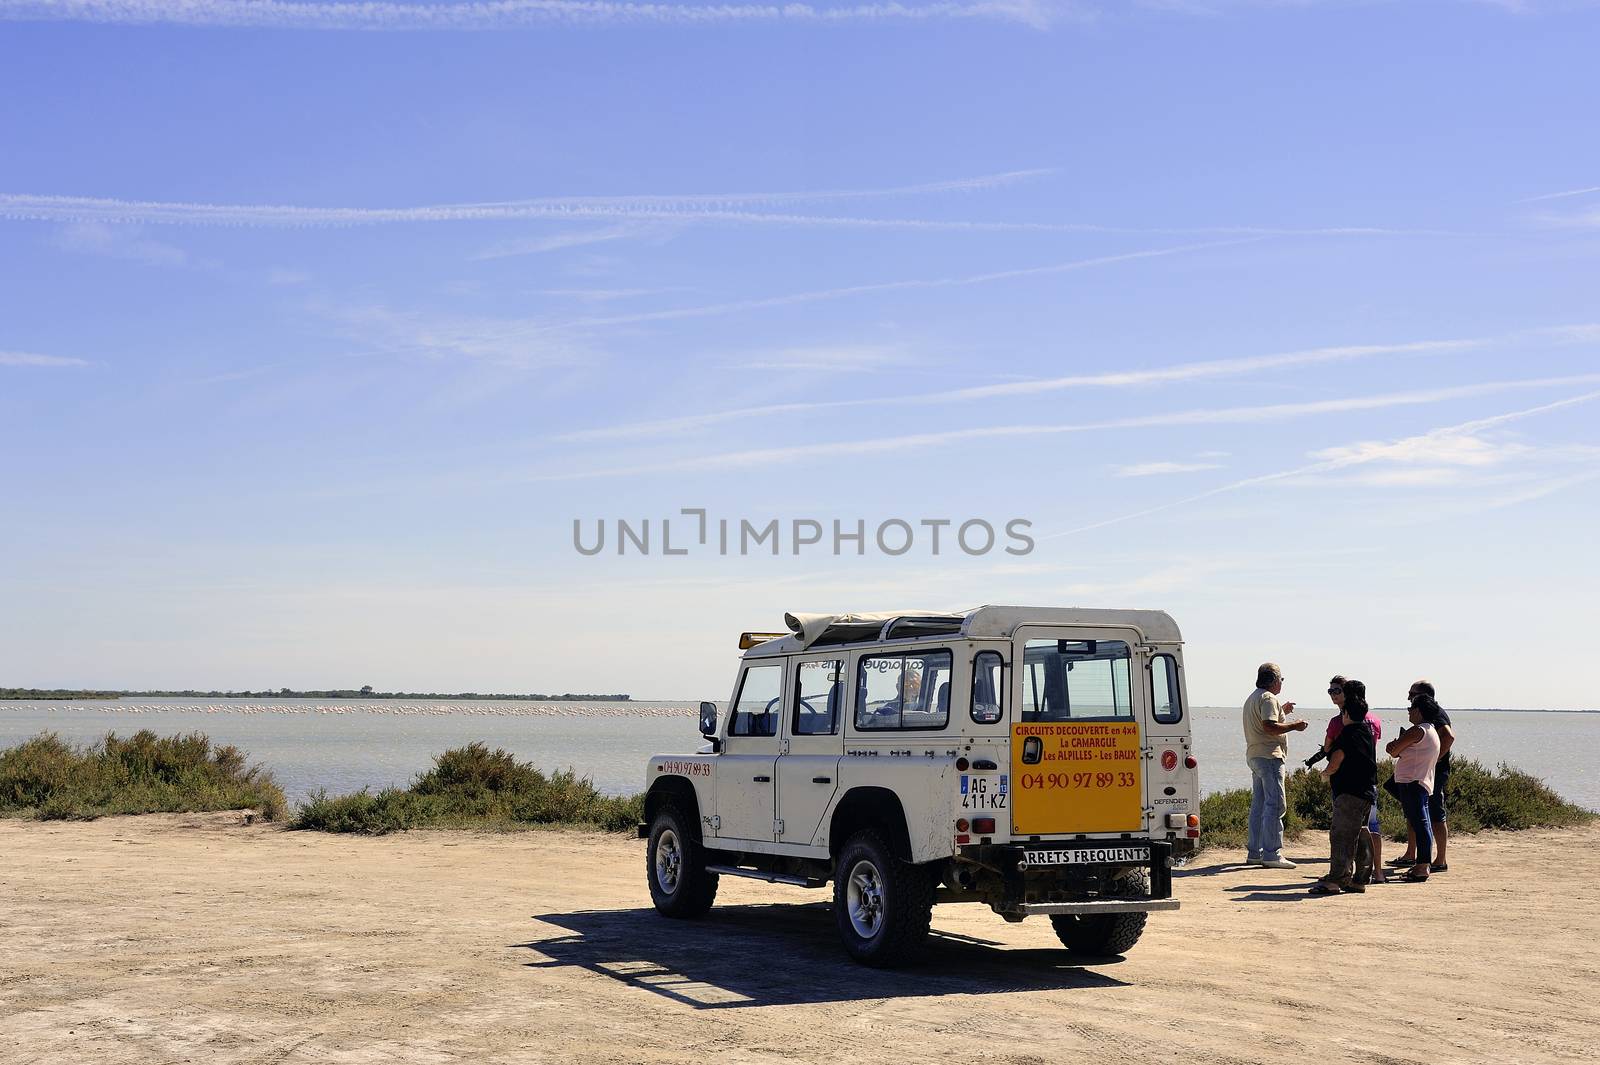 Tourists visiting the Camargue 4x4 by gillespaire